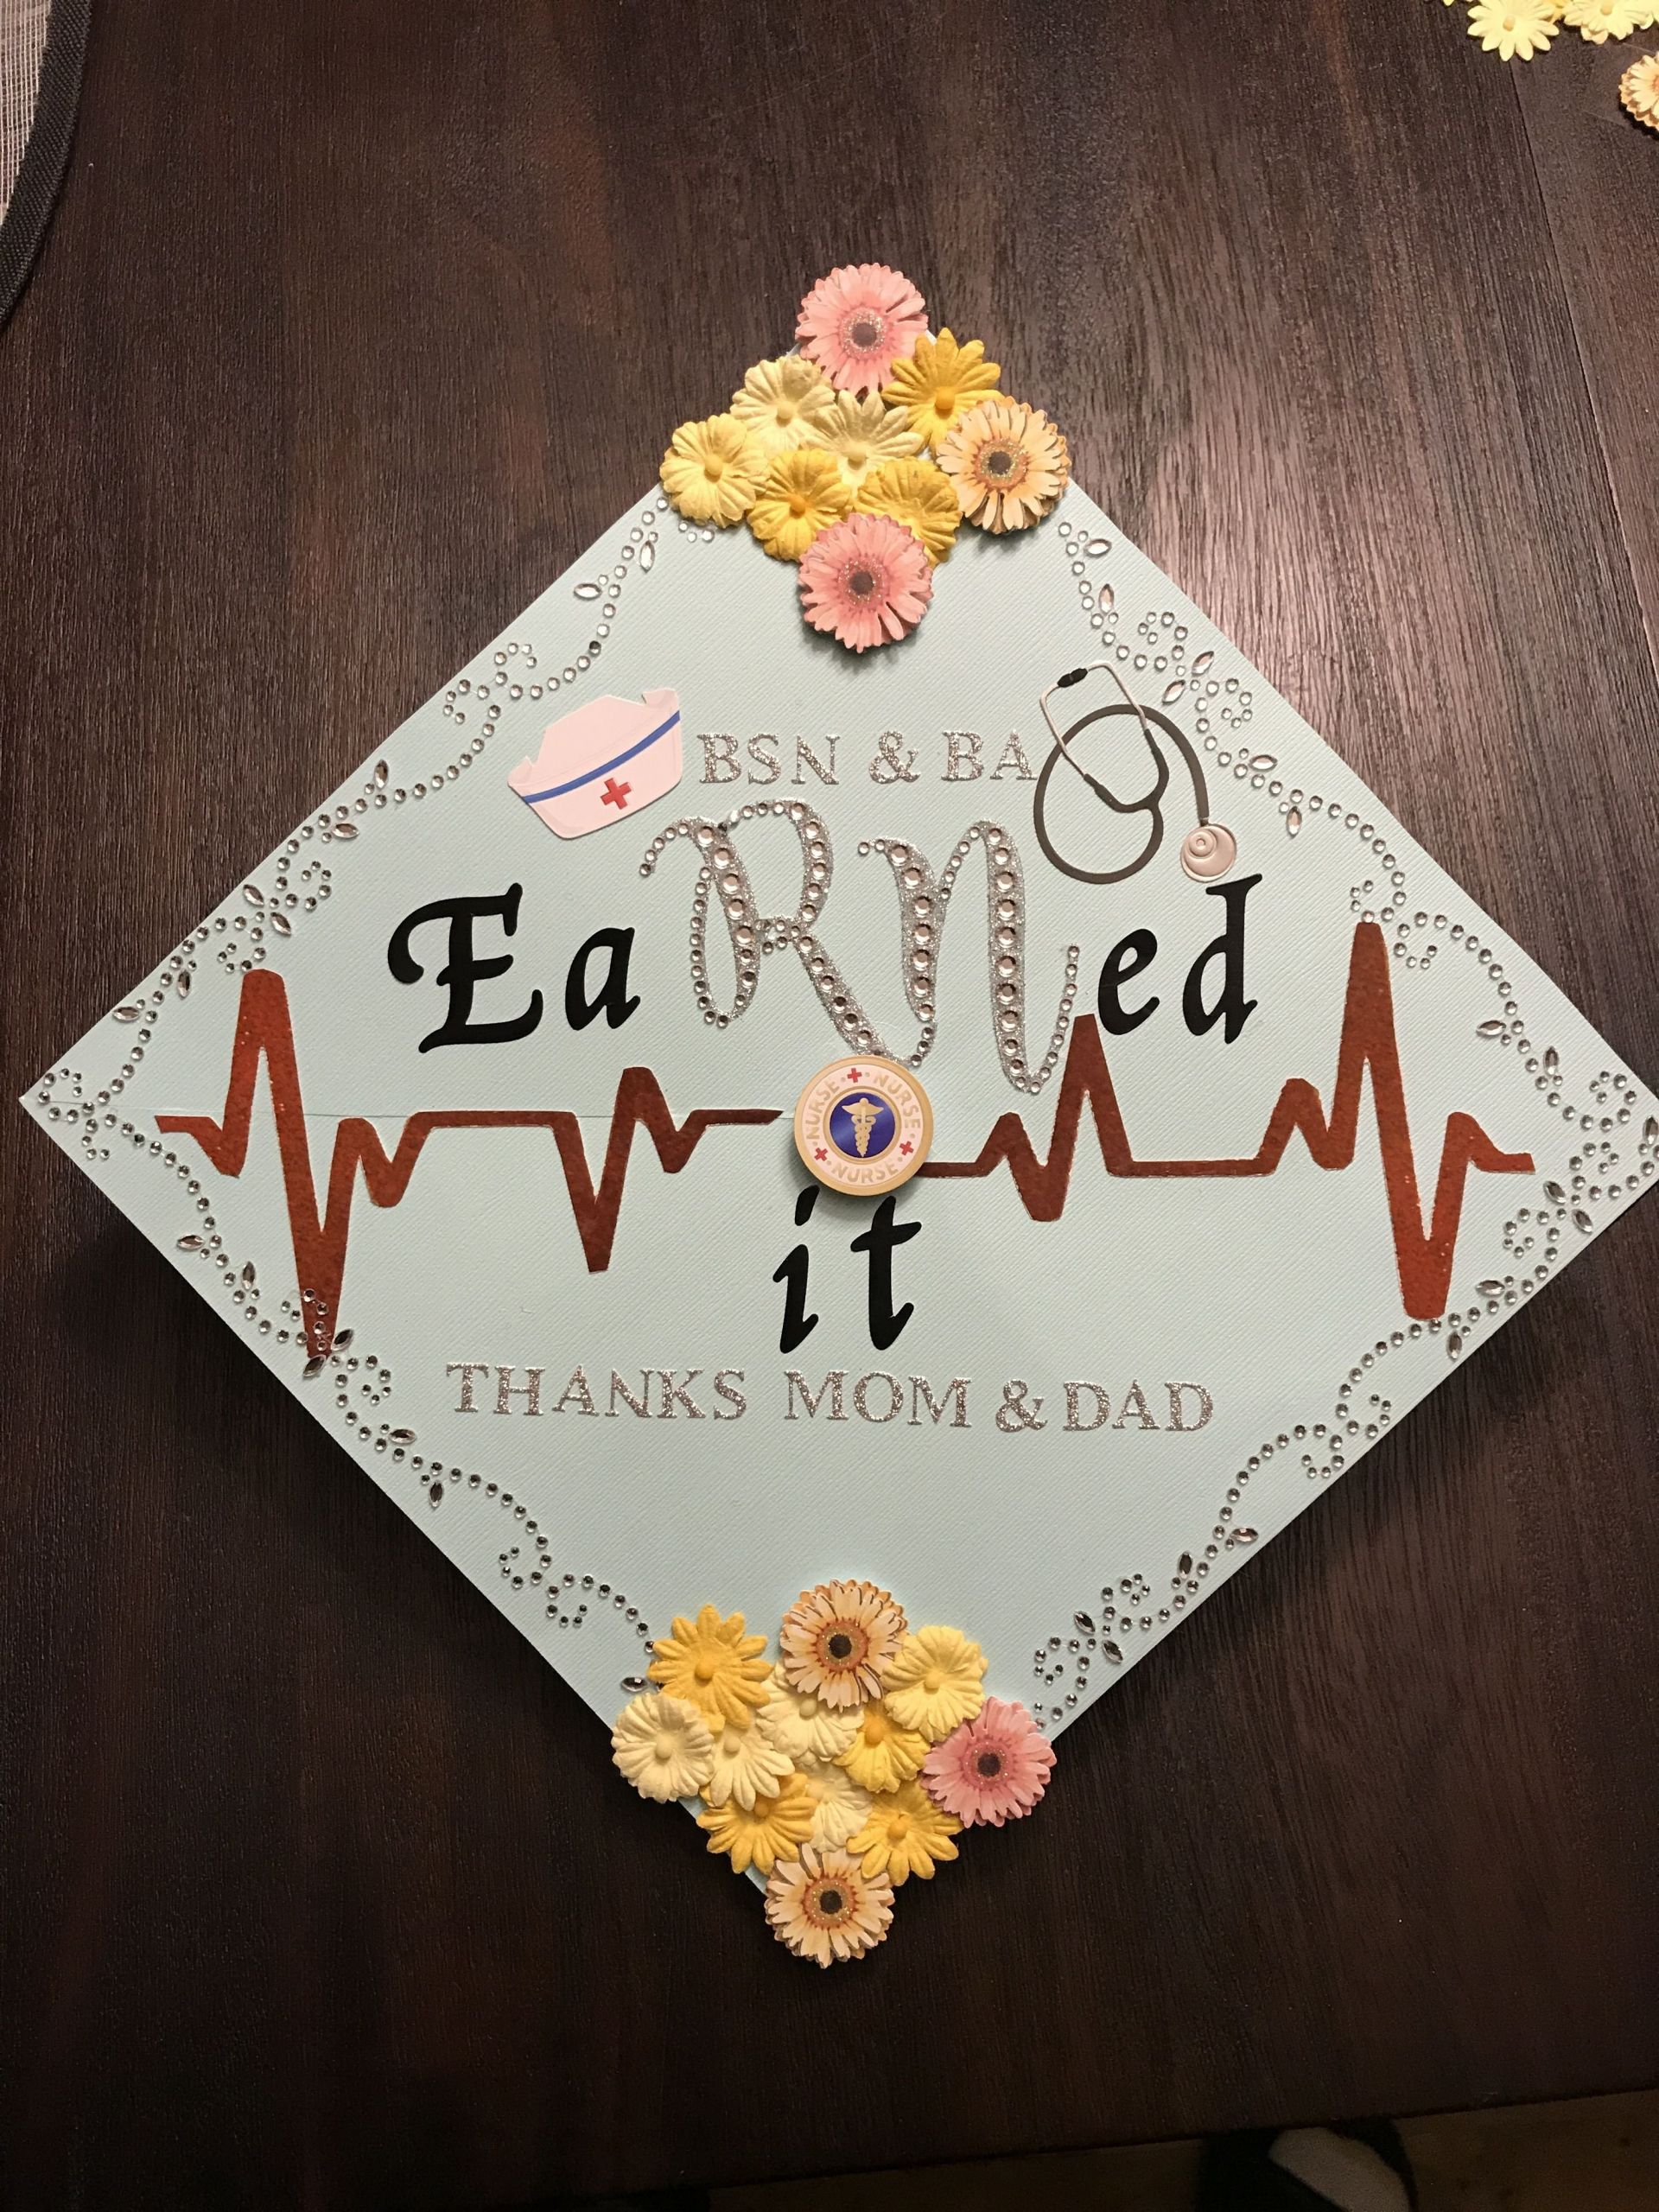 Graduation Gift Ideas For Daughter
 10 Stylish Graduation Gift Ideas For Daughter 2019